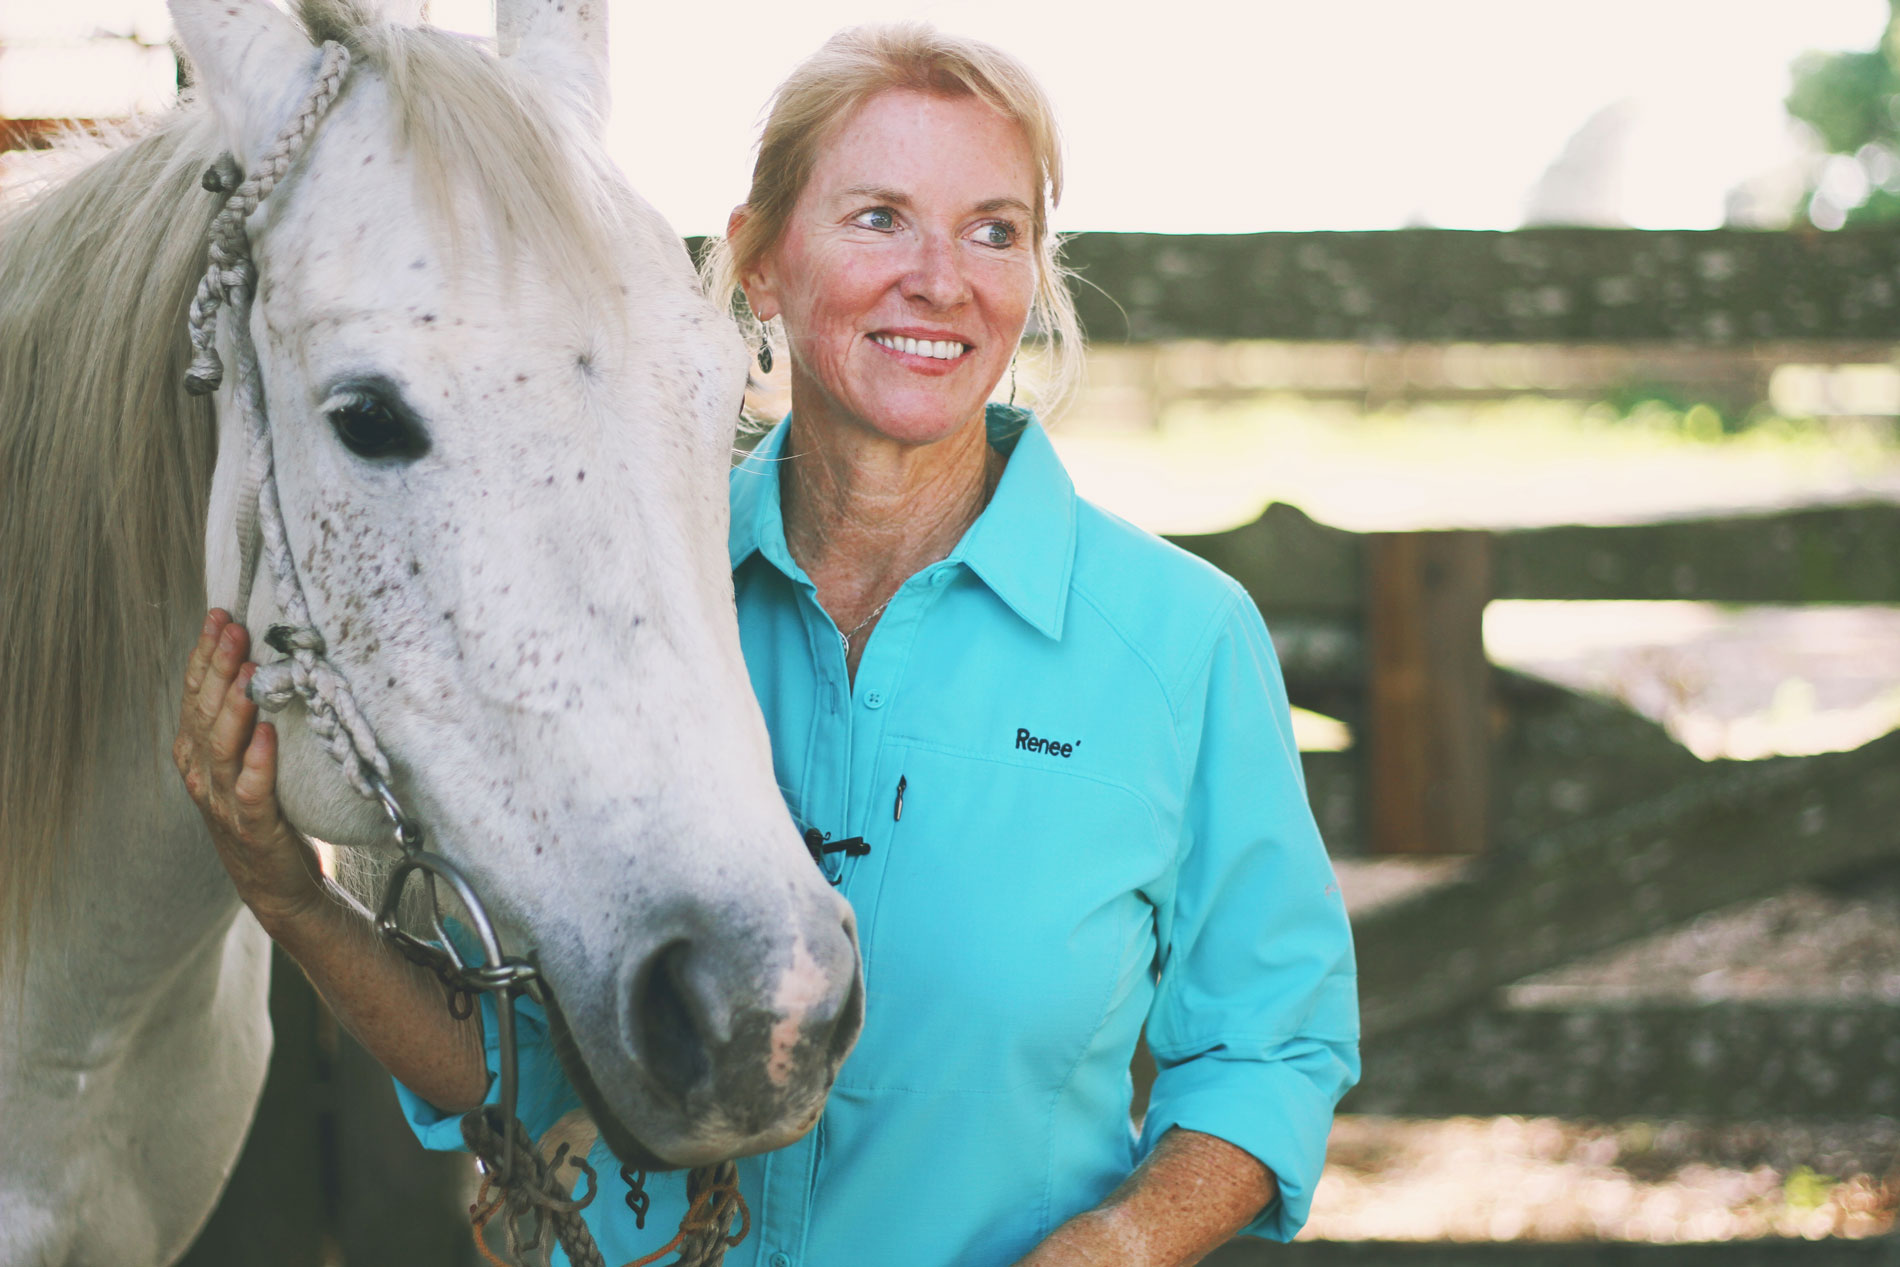 Strickland Ranch & Exporting Featured On “FarmHer” Tv Series On RFD-TV